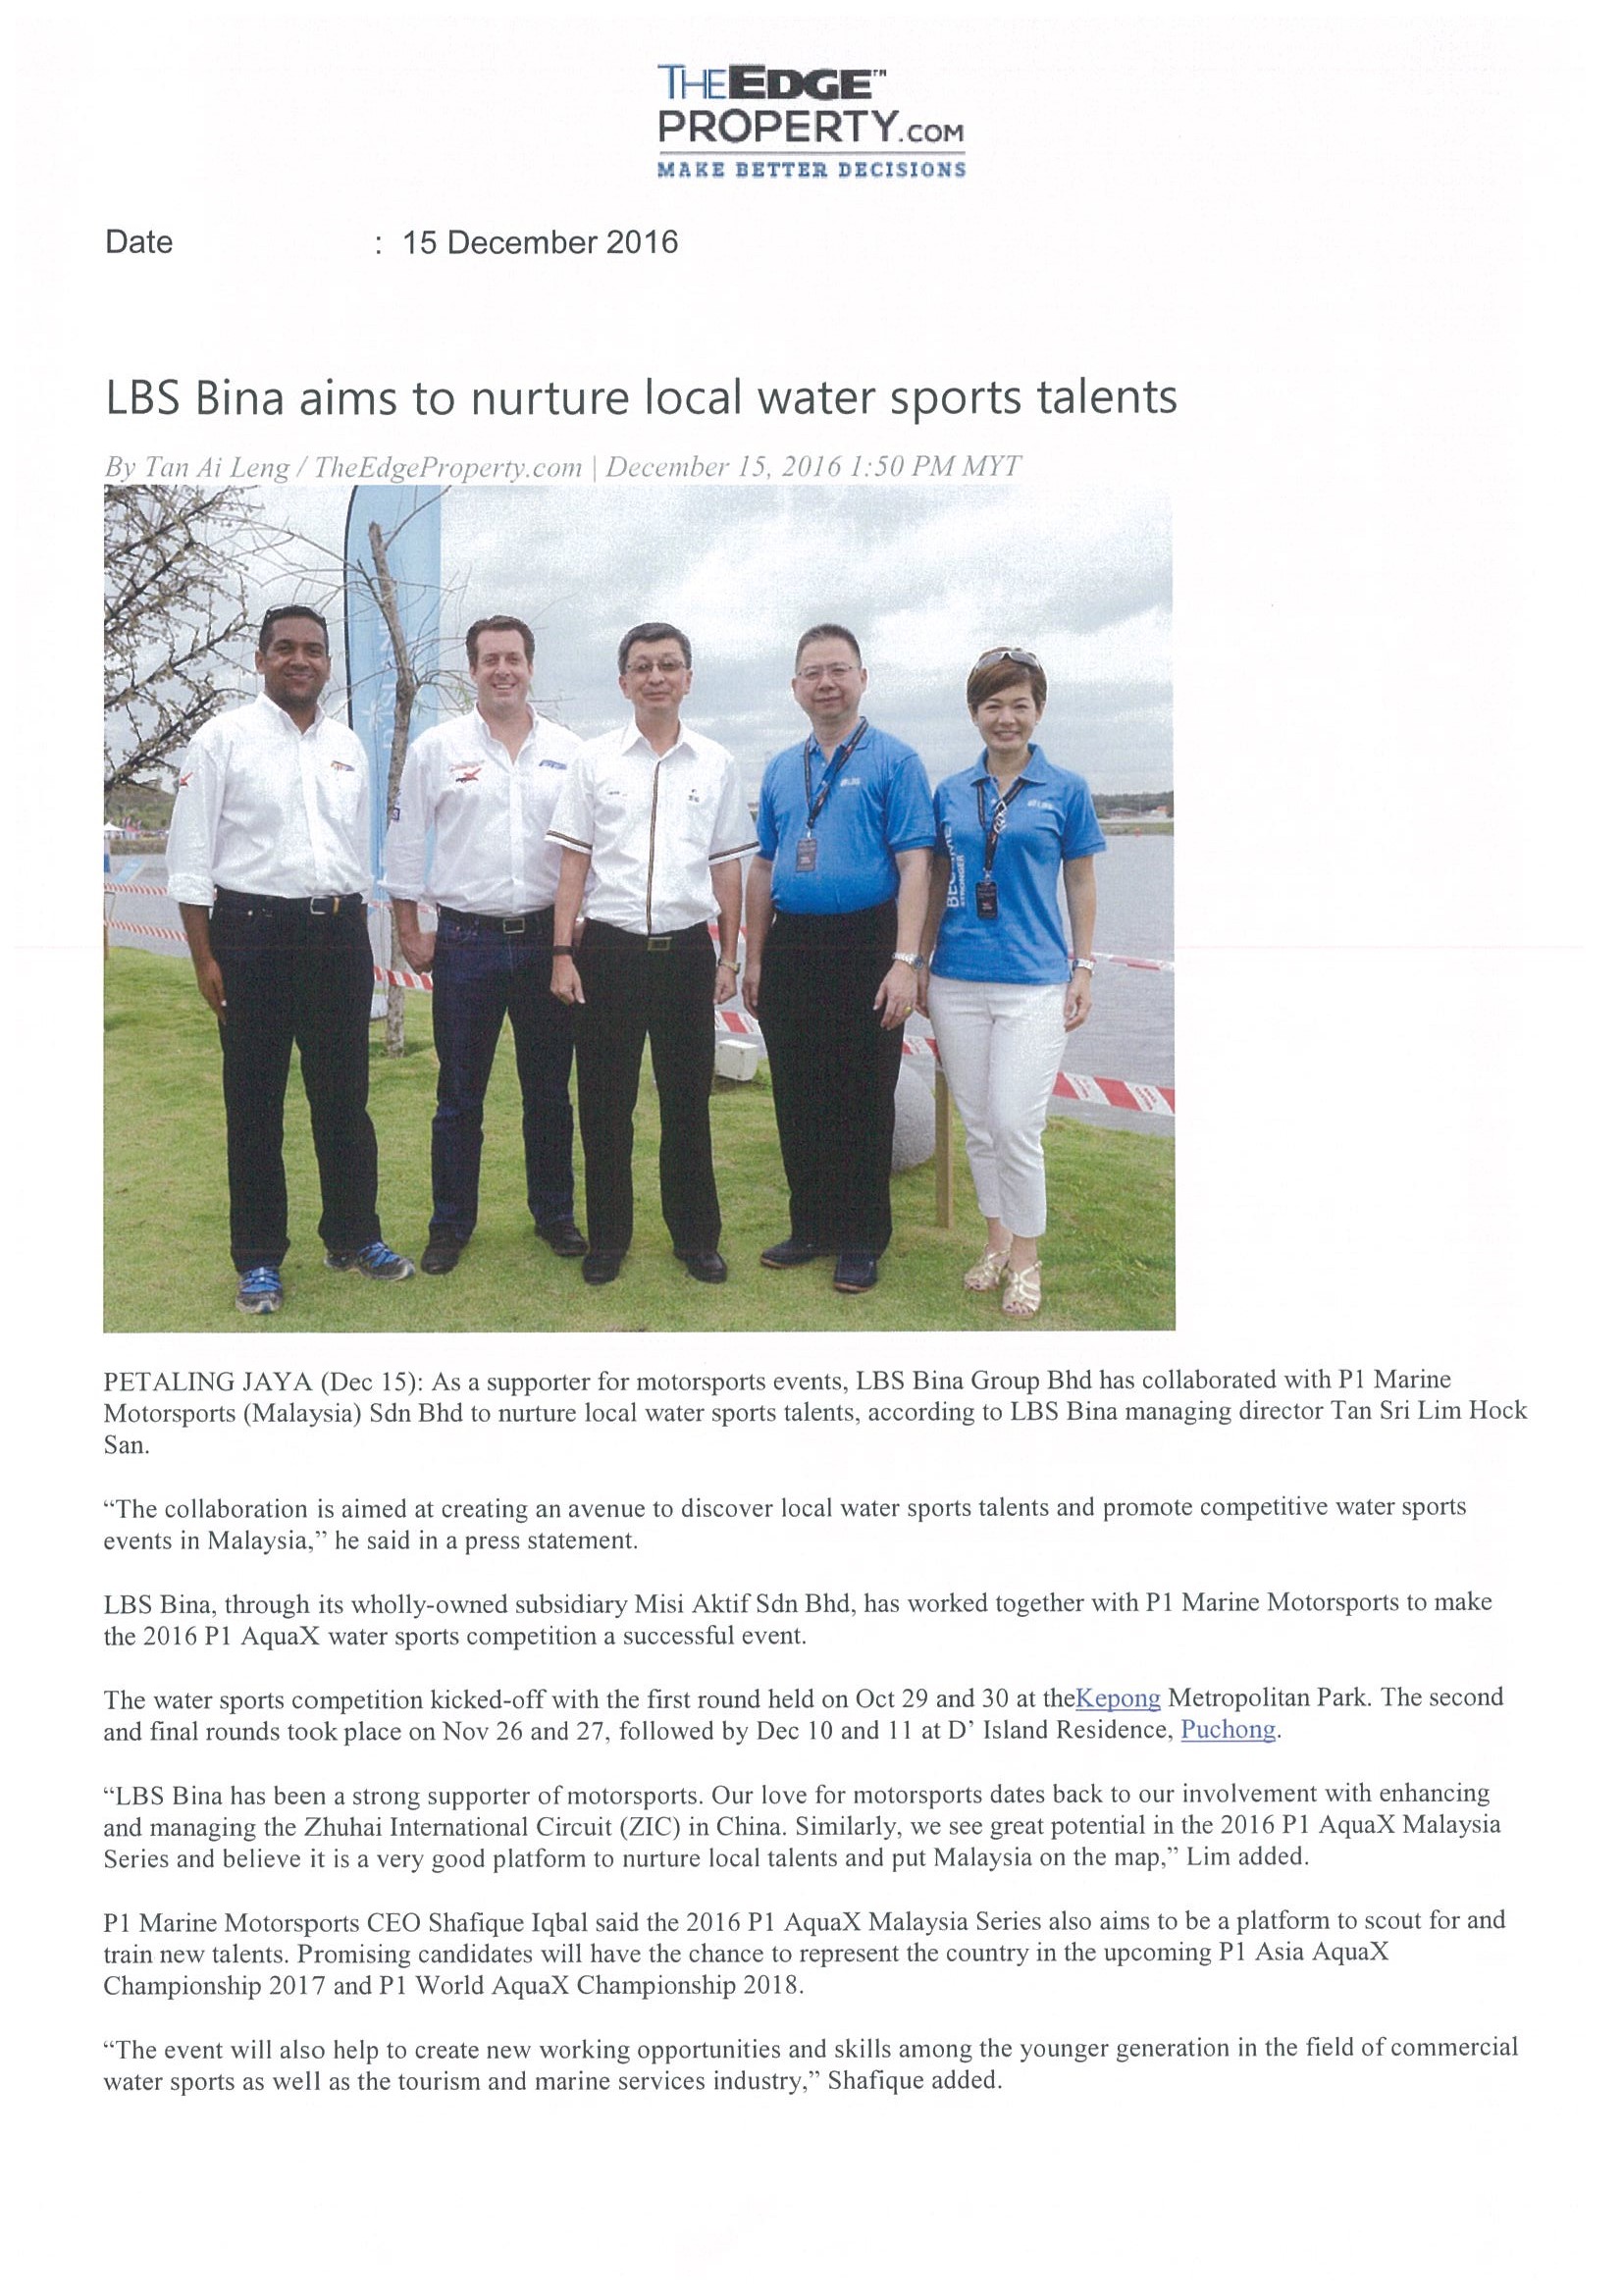 2016.12.15 The Edge Online – LBS Bina aims to nurture local water sports talents